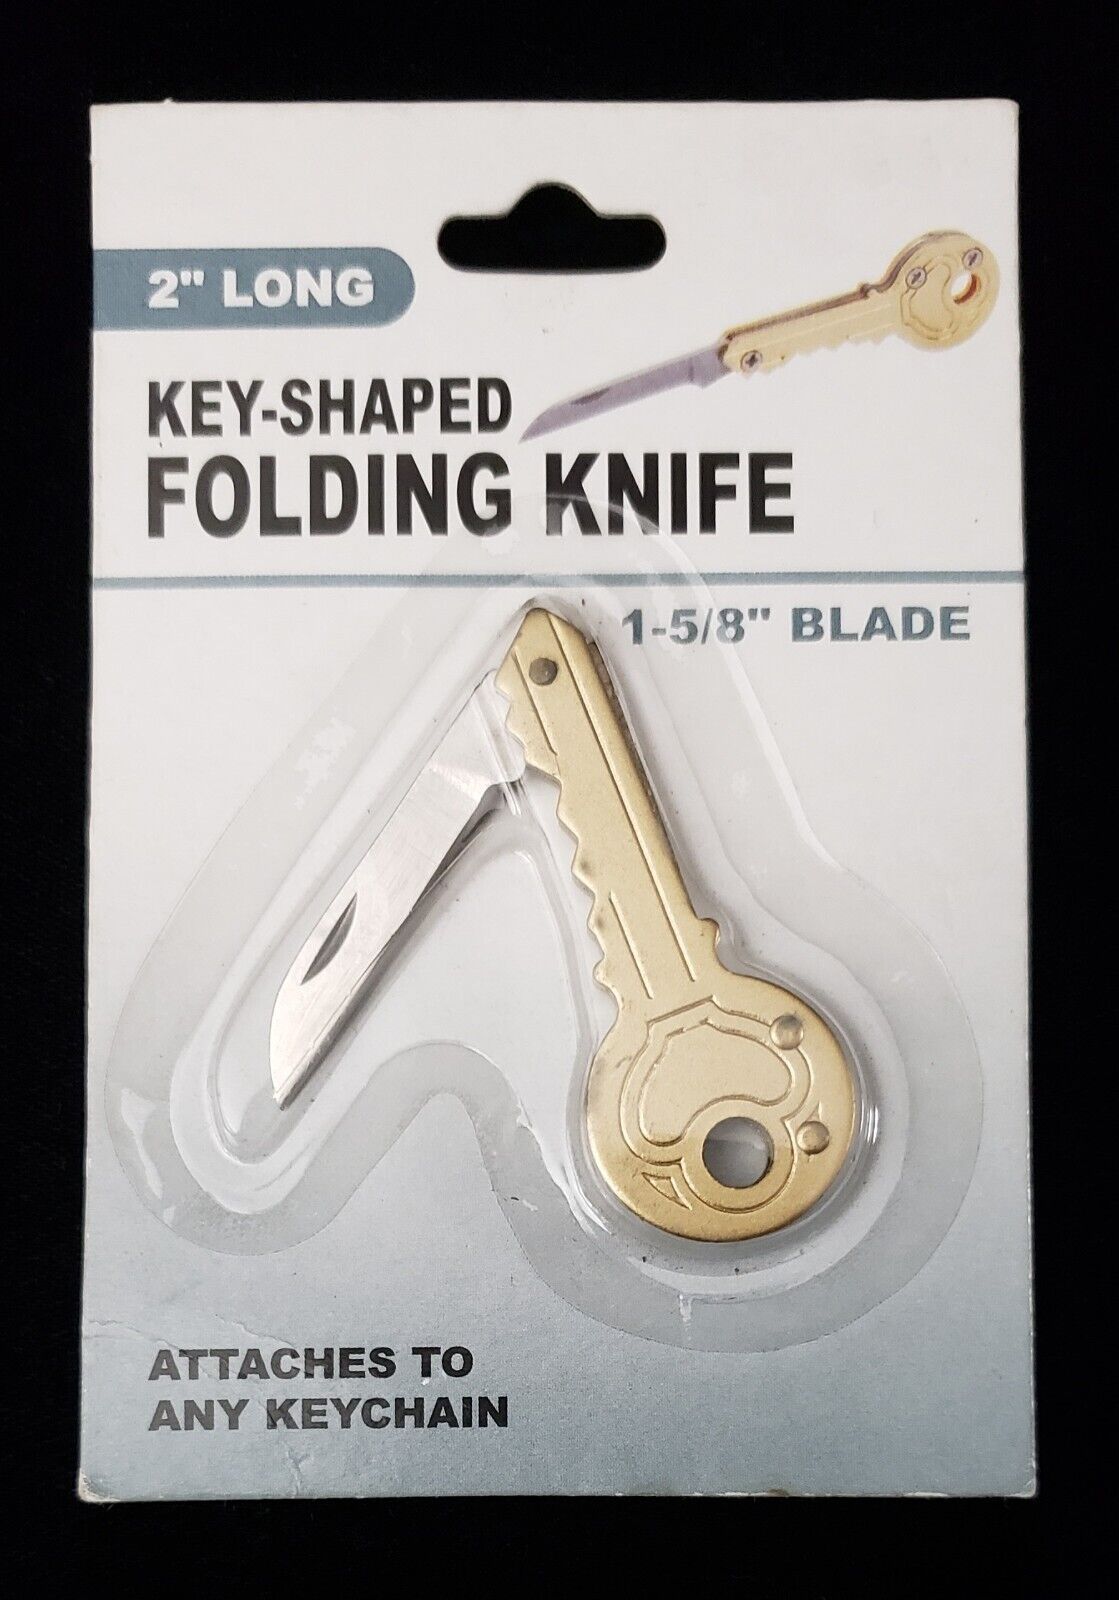 NEW-IN-PACKAGE Key Shaped Folding Knife STAINLESS STEEL Brass Colored